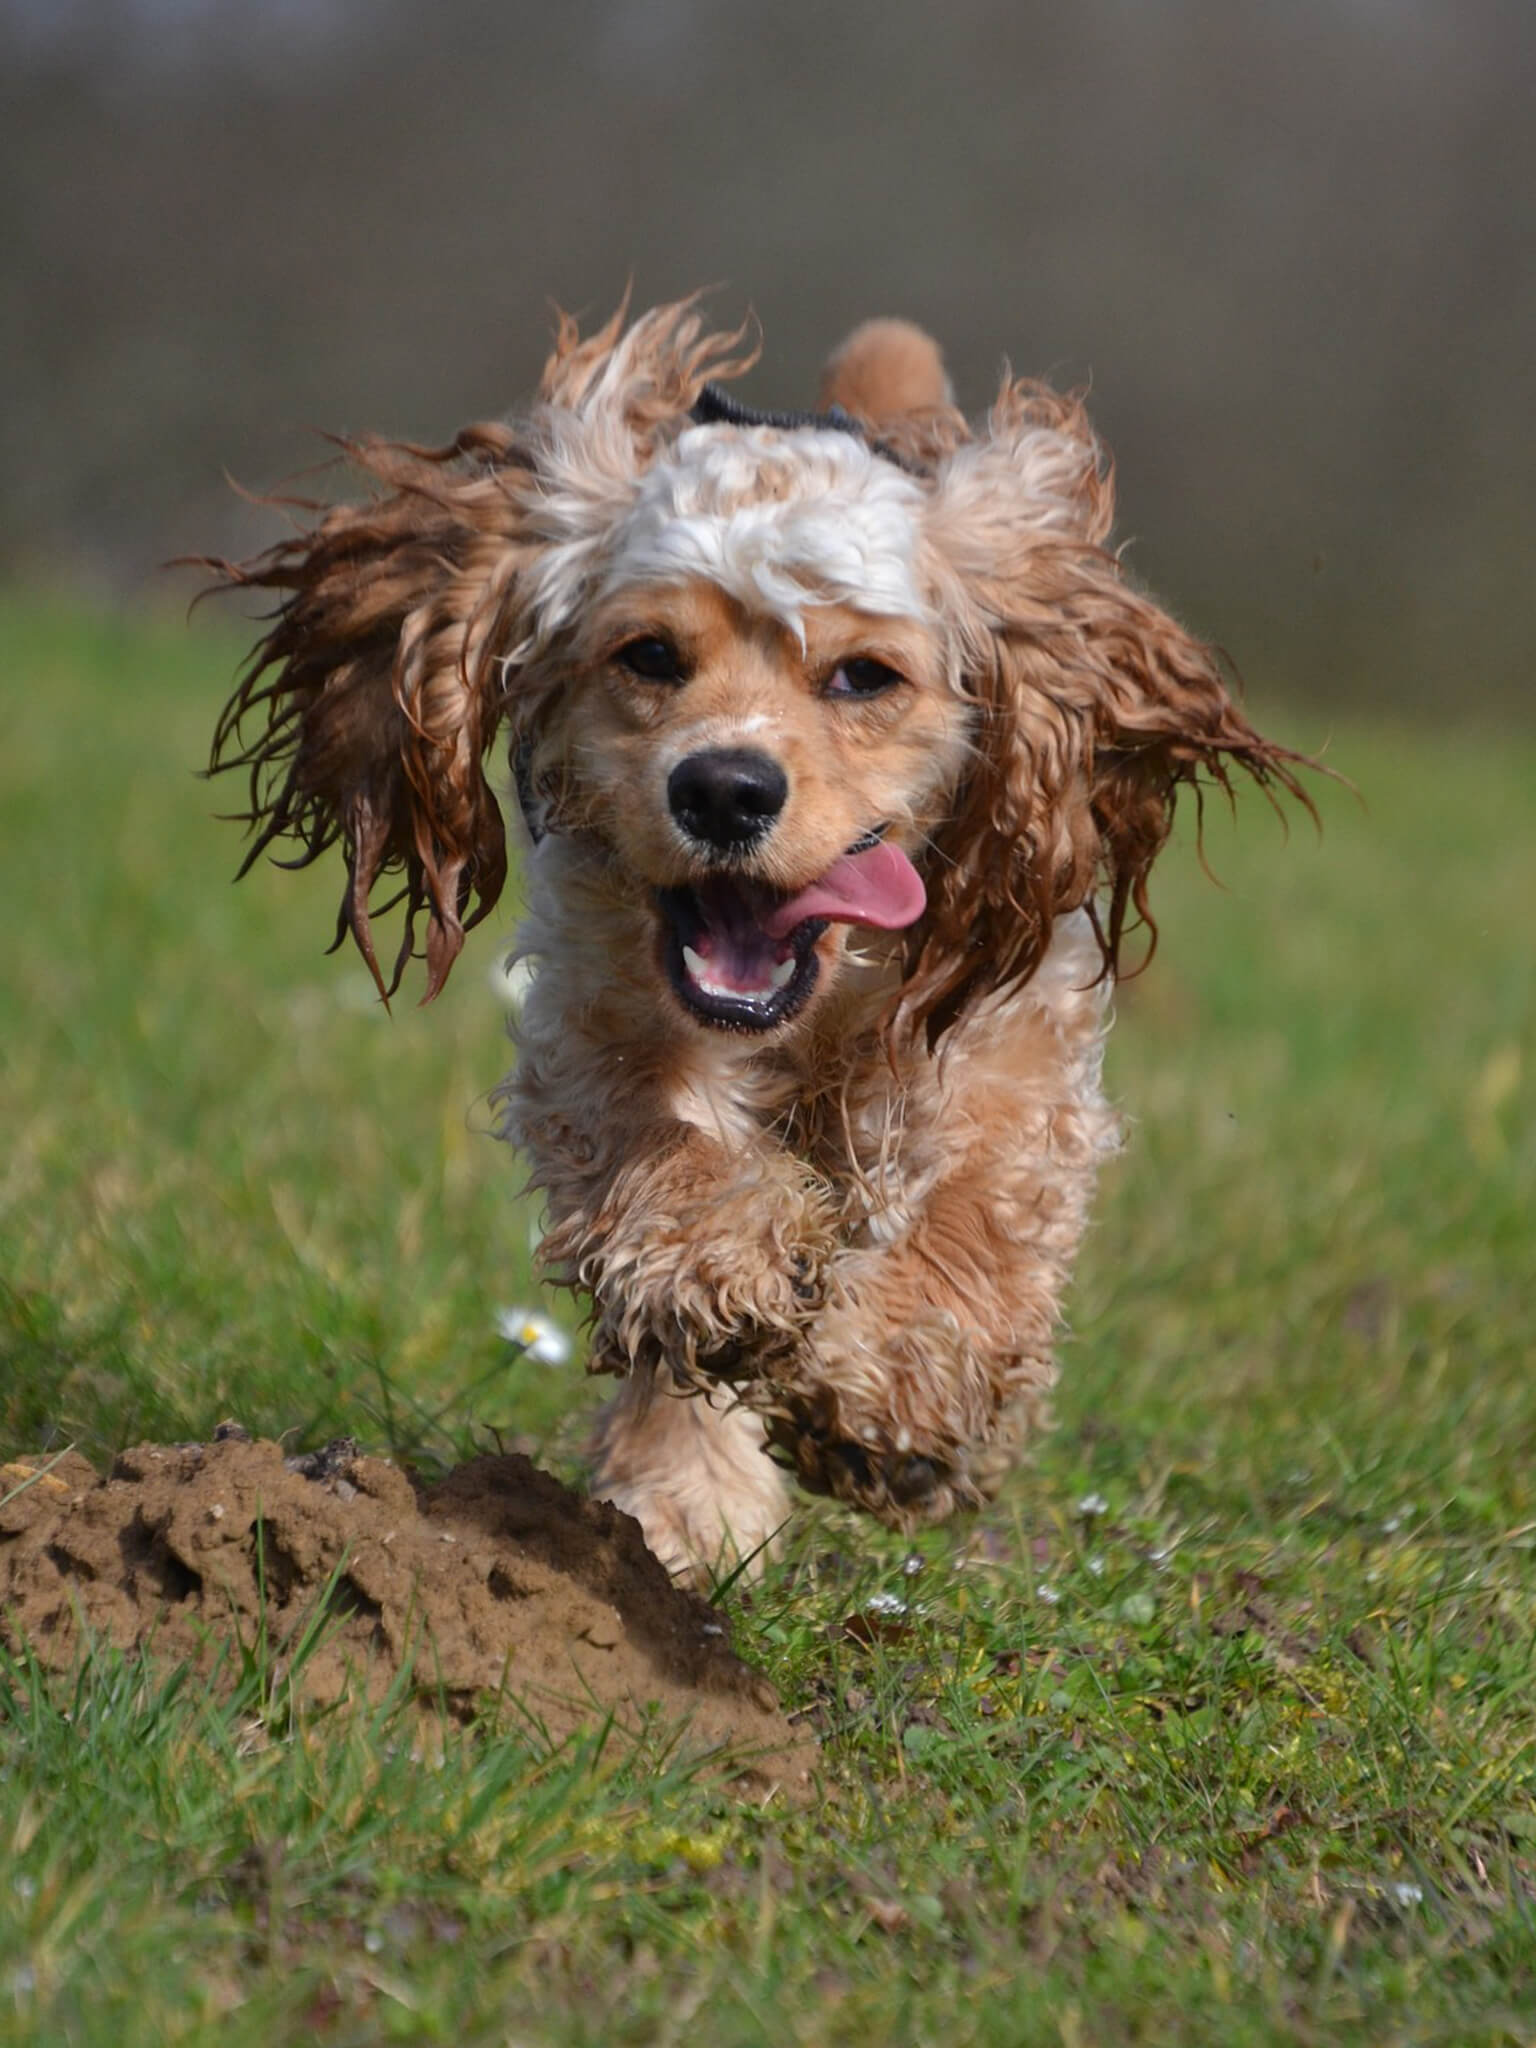 is a cocker spaniel easy to train